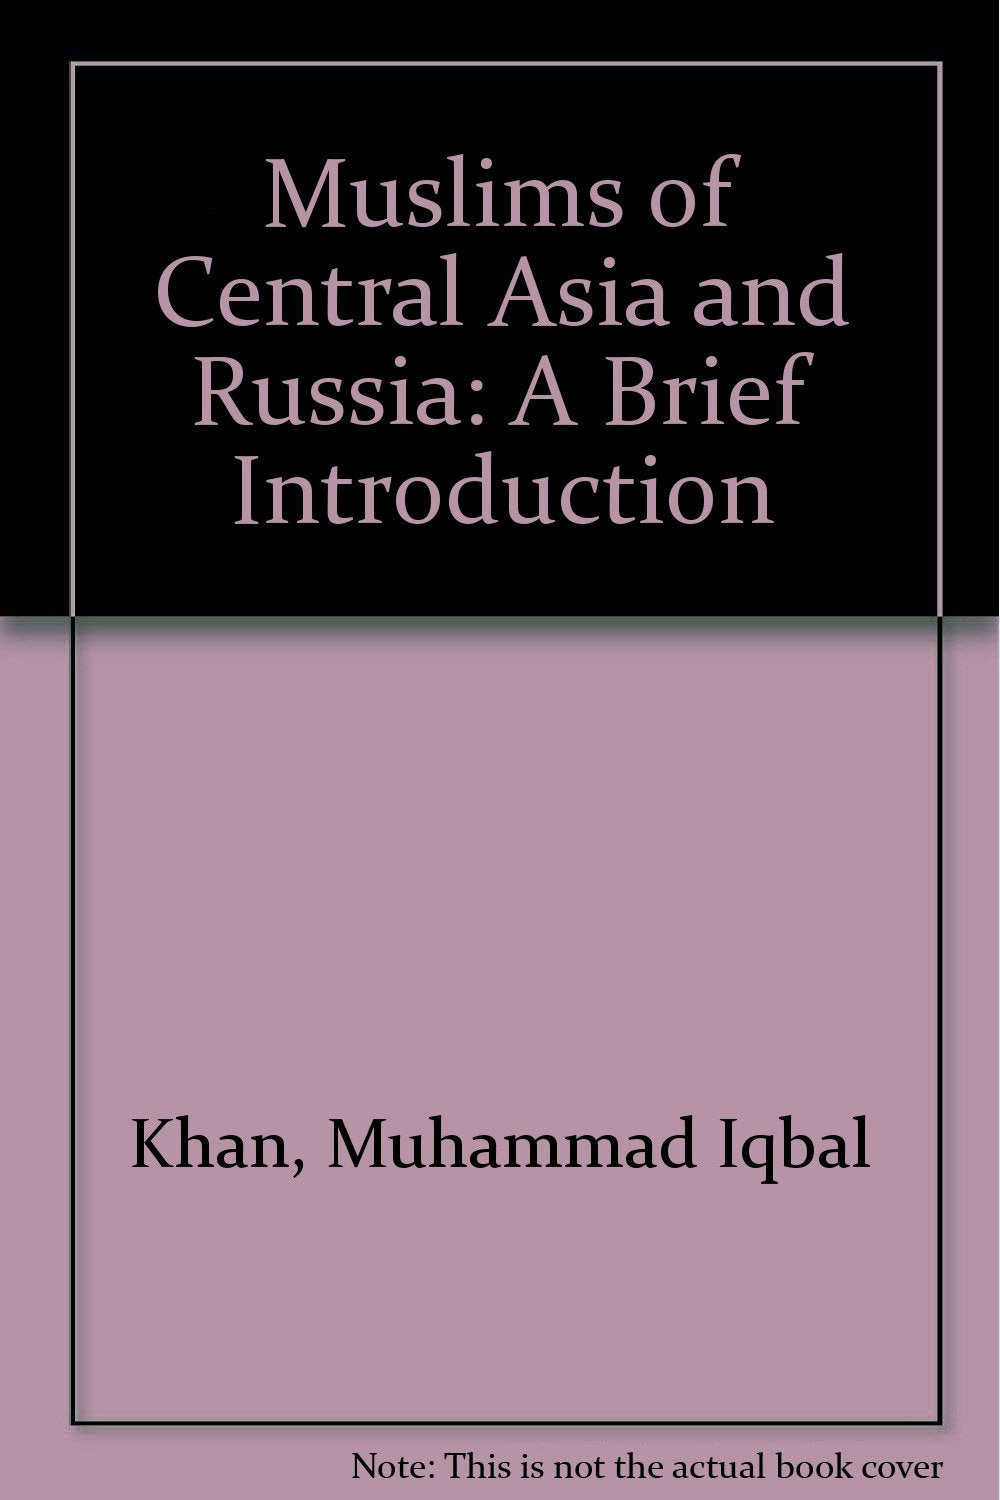 Muslims of Central Asia and Russia: A Brief Introduction